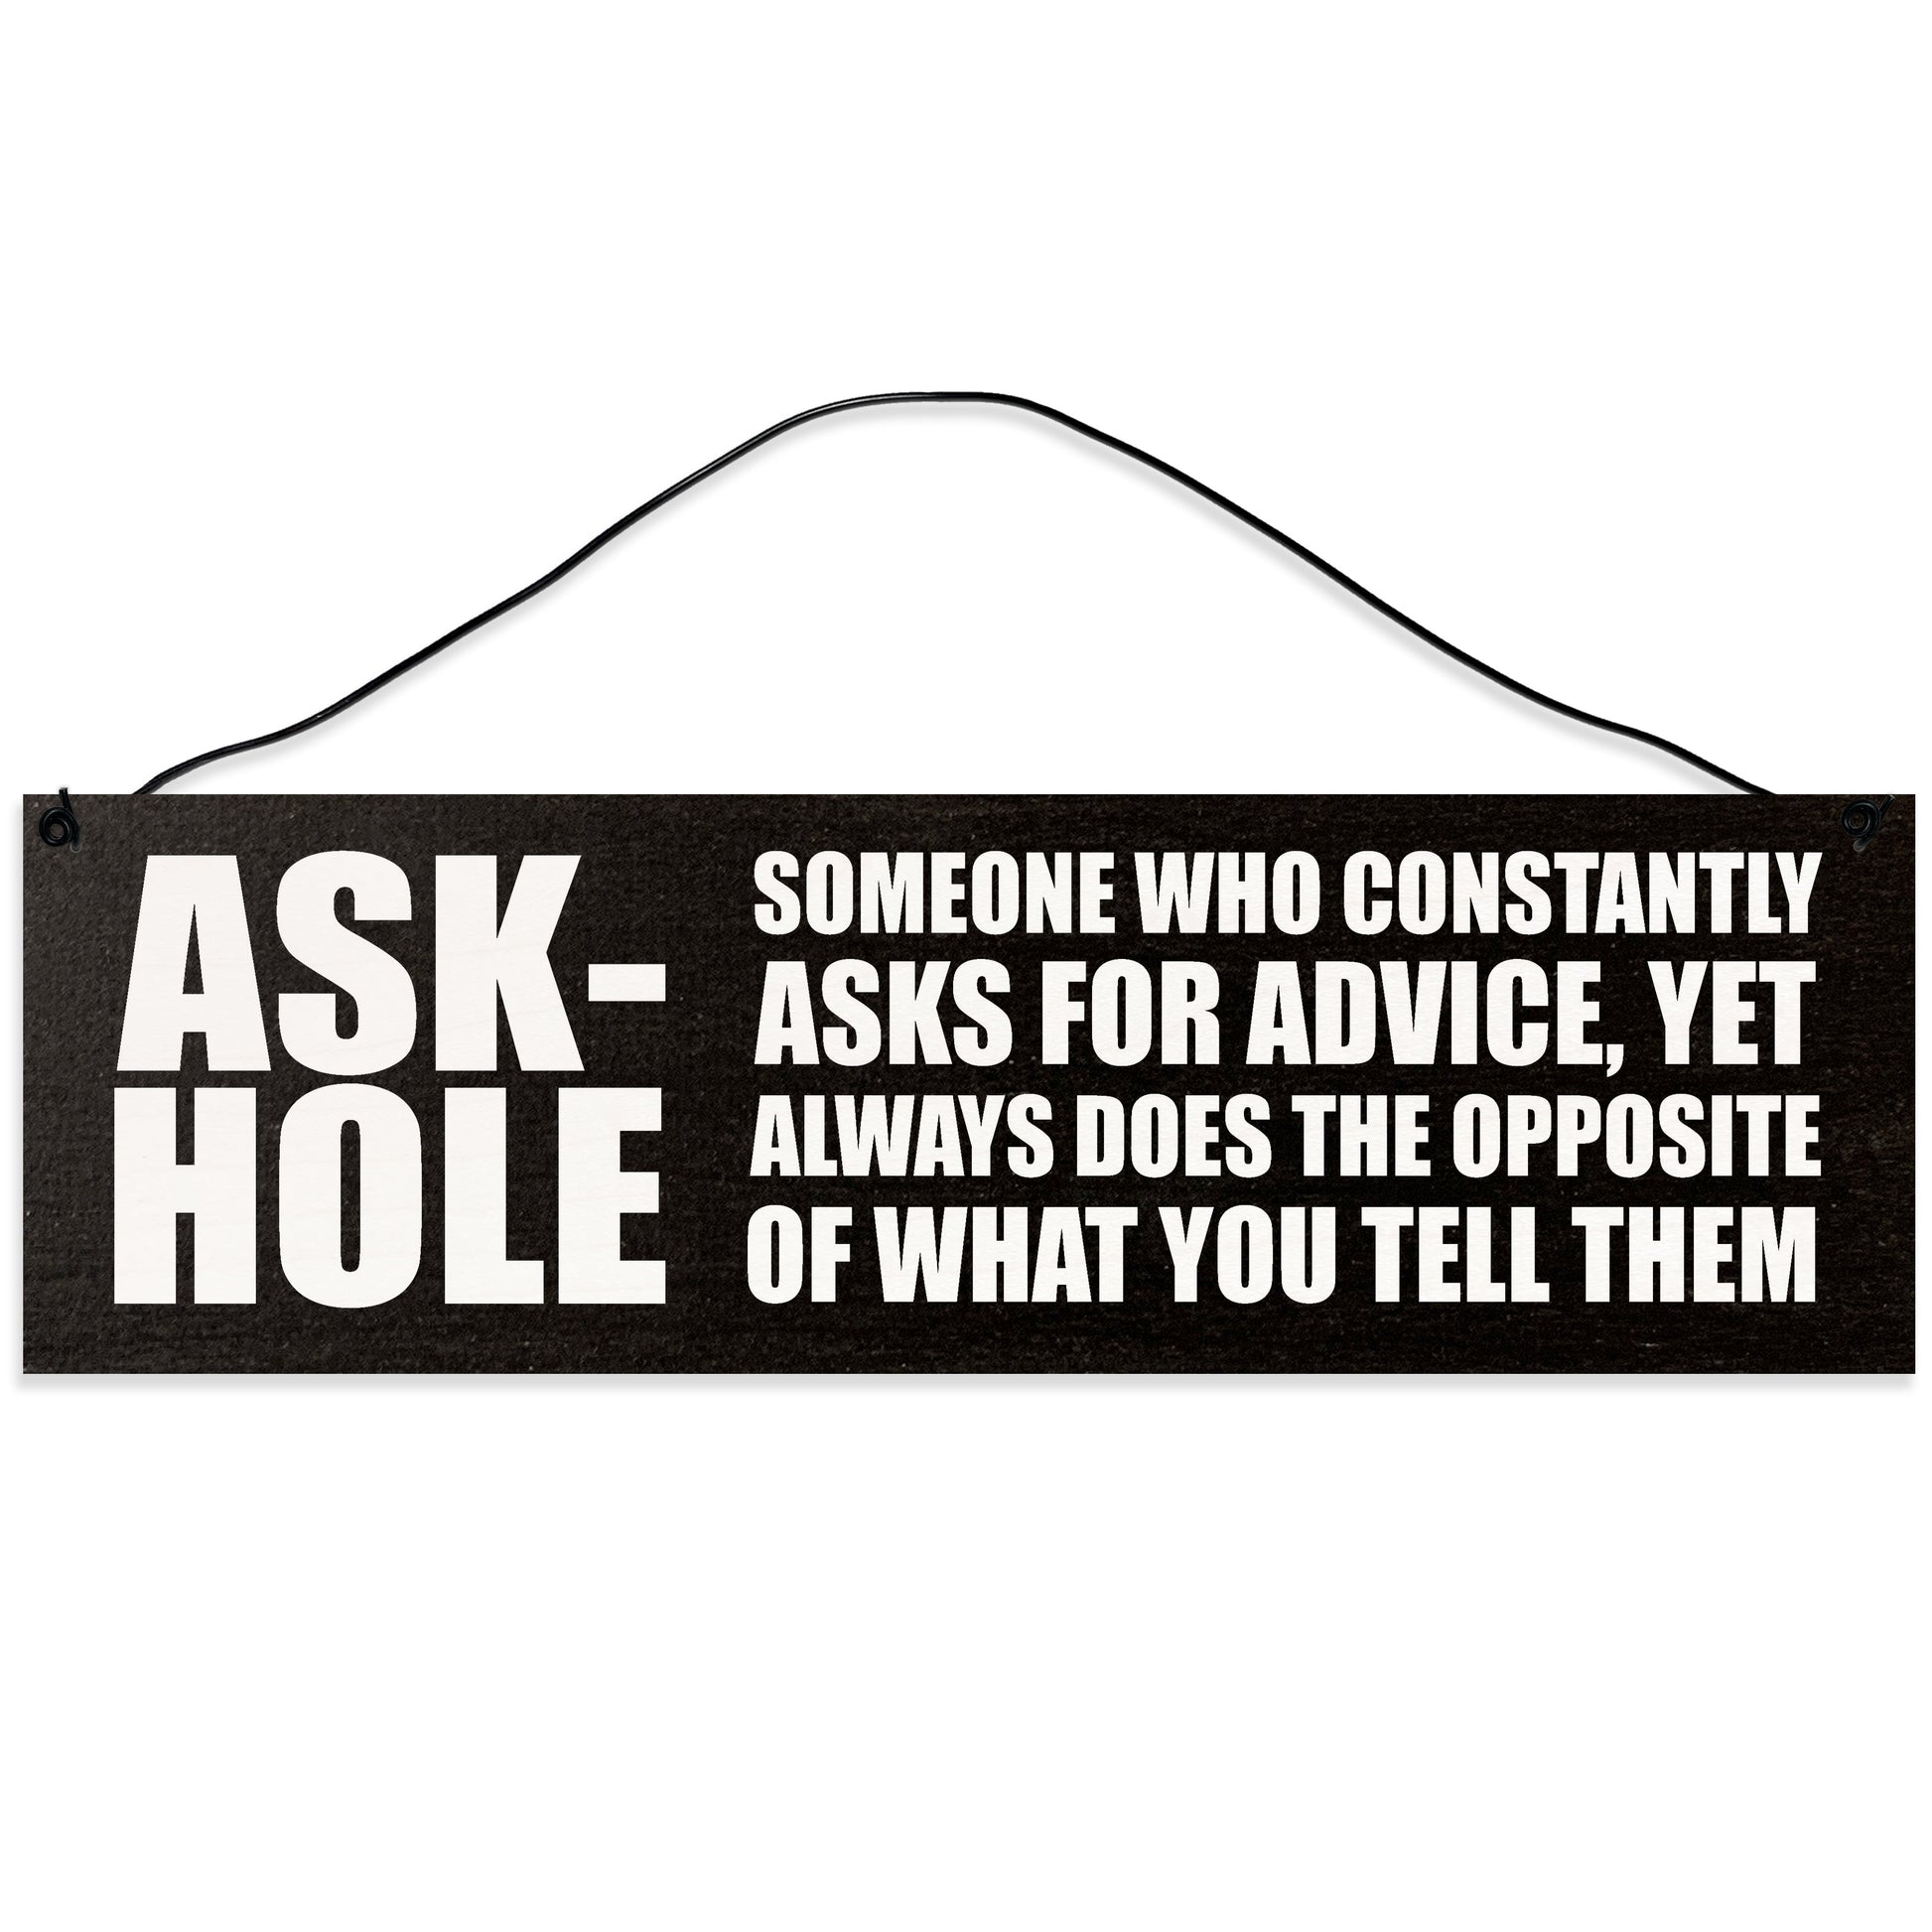 Sawyer's Mill - Ask-Hole. Someone Who Constantly Ask for Advice. Wood Sign for Home or Office. Measures 3x10 inches.